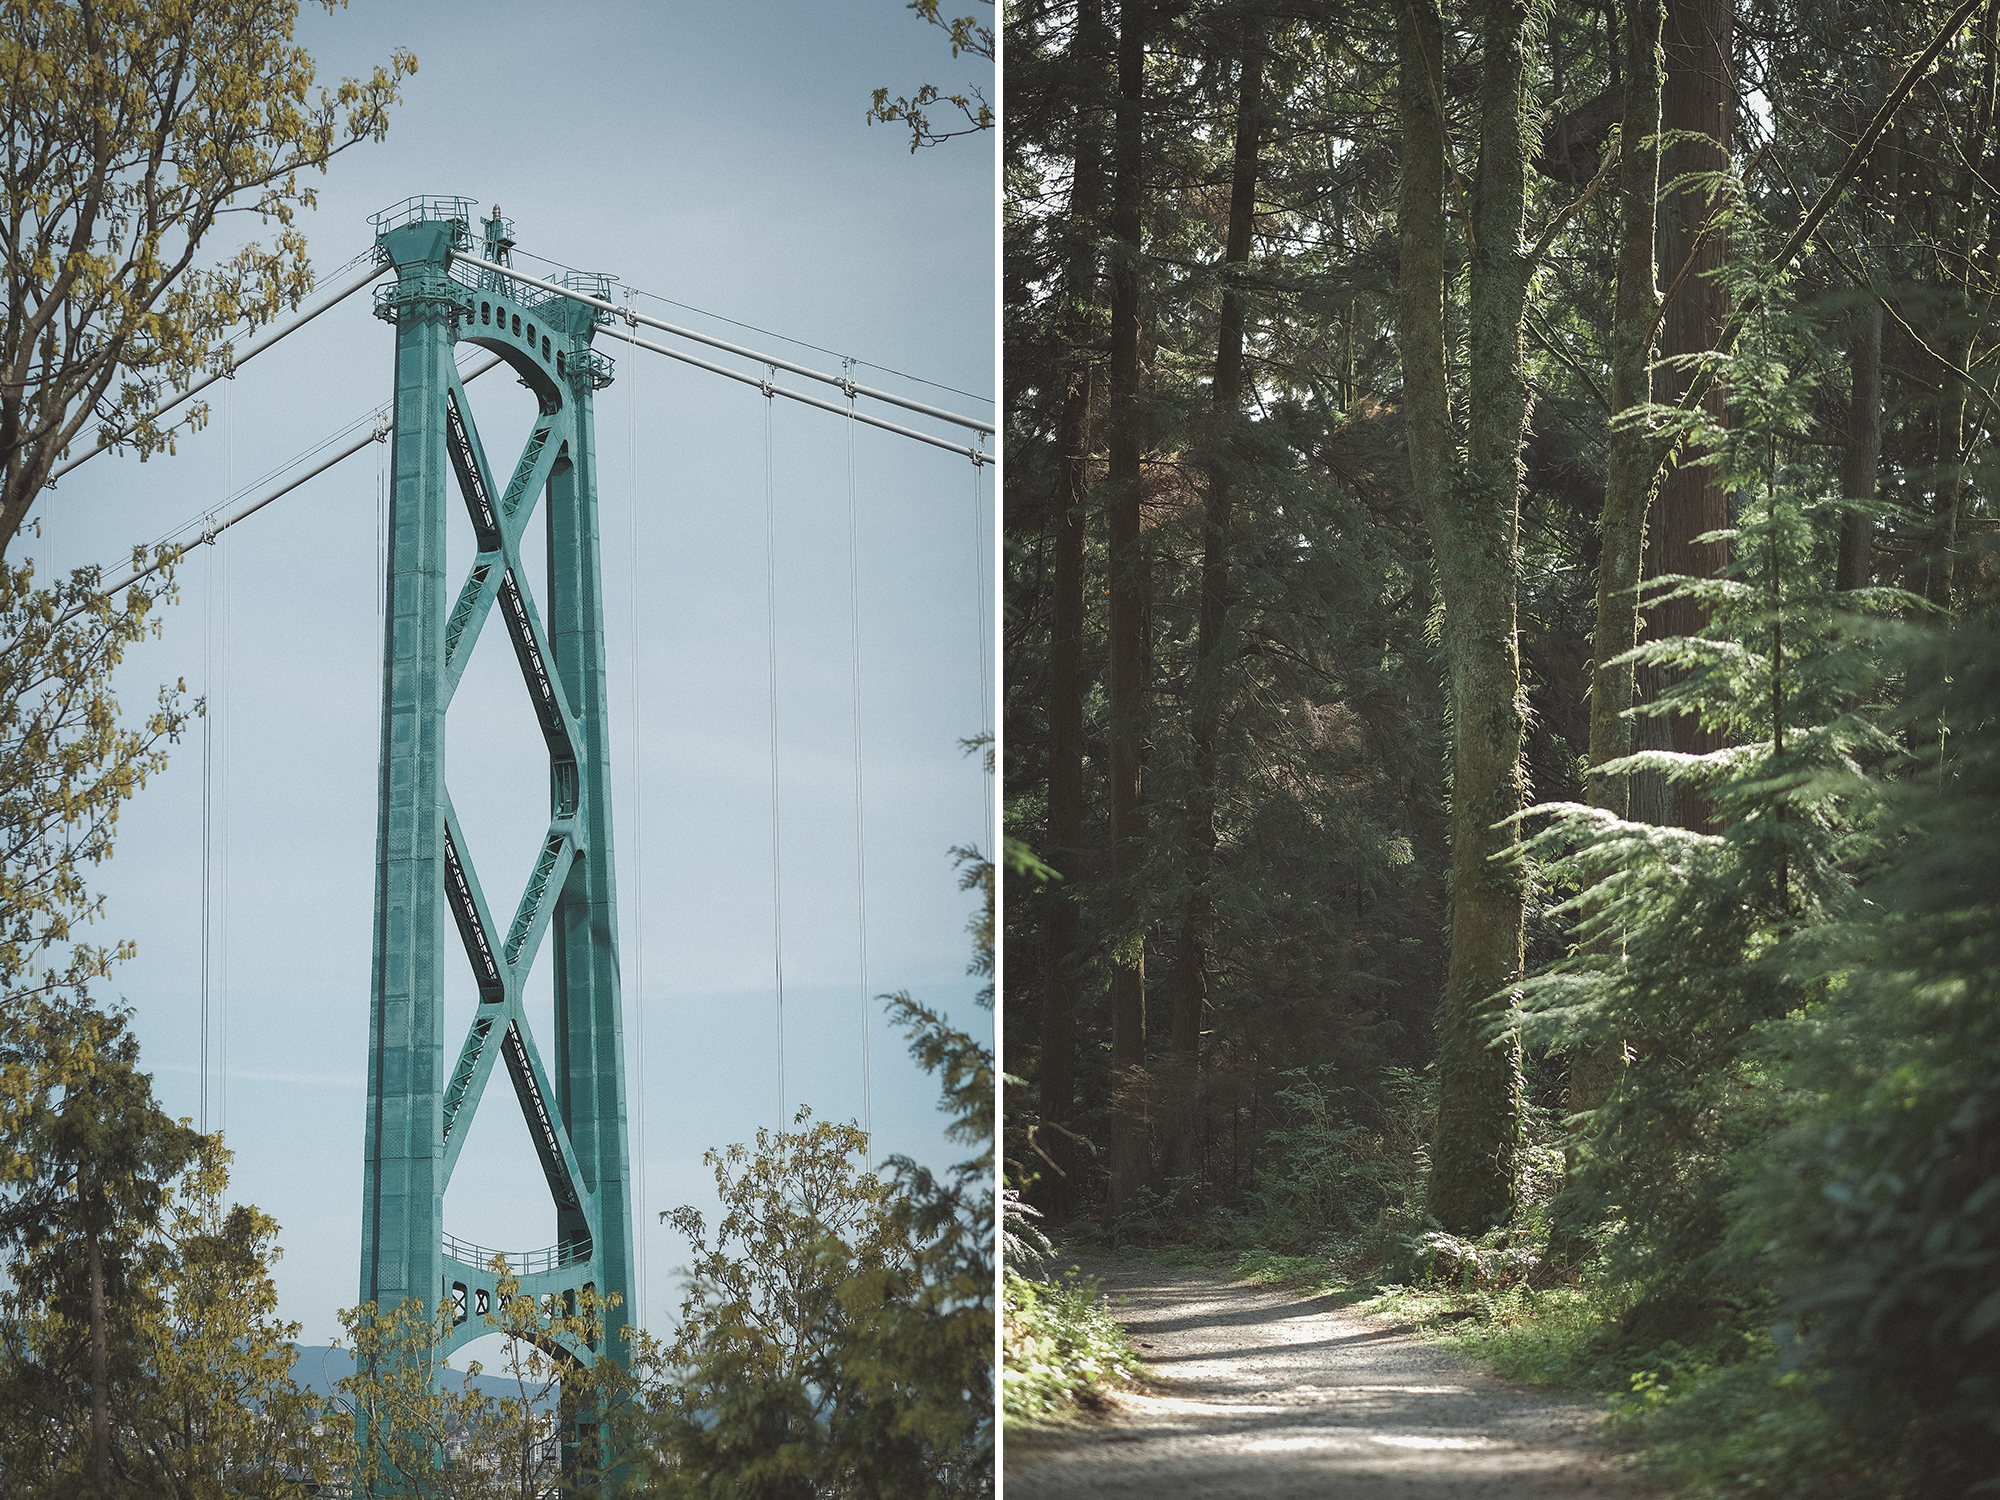 View of the Lion's Gate Bridge and path way in Stanley Park.